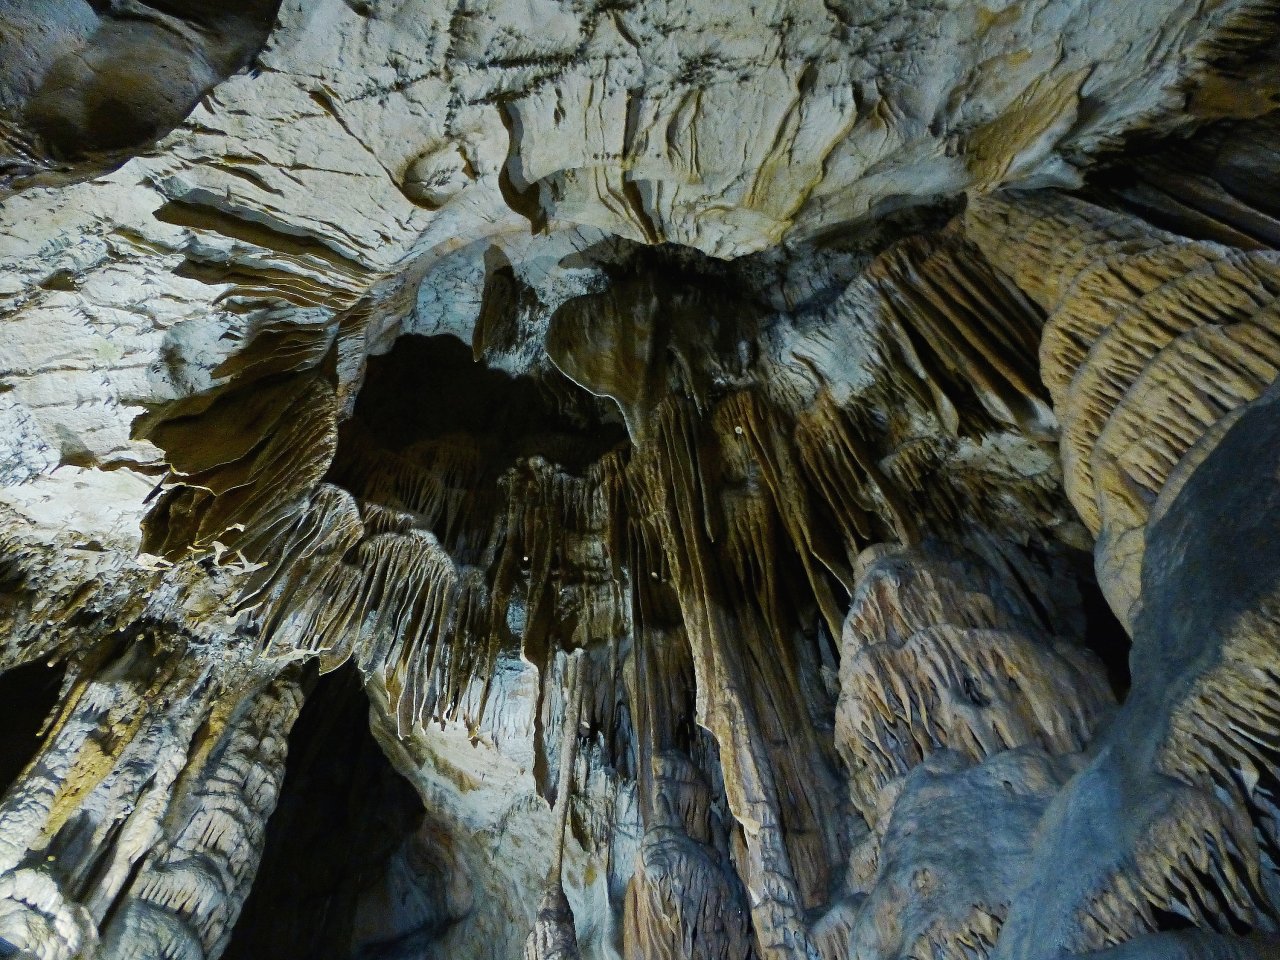 Jasovska cave, Best places to visit in Slovakia 2